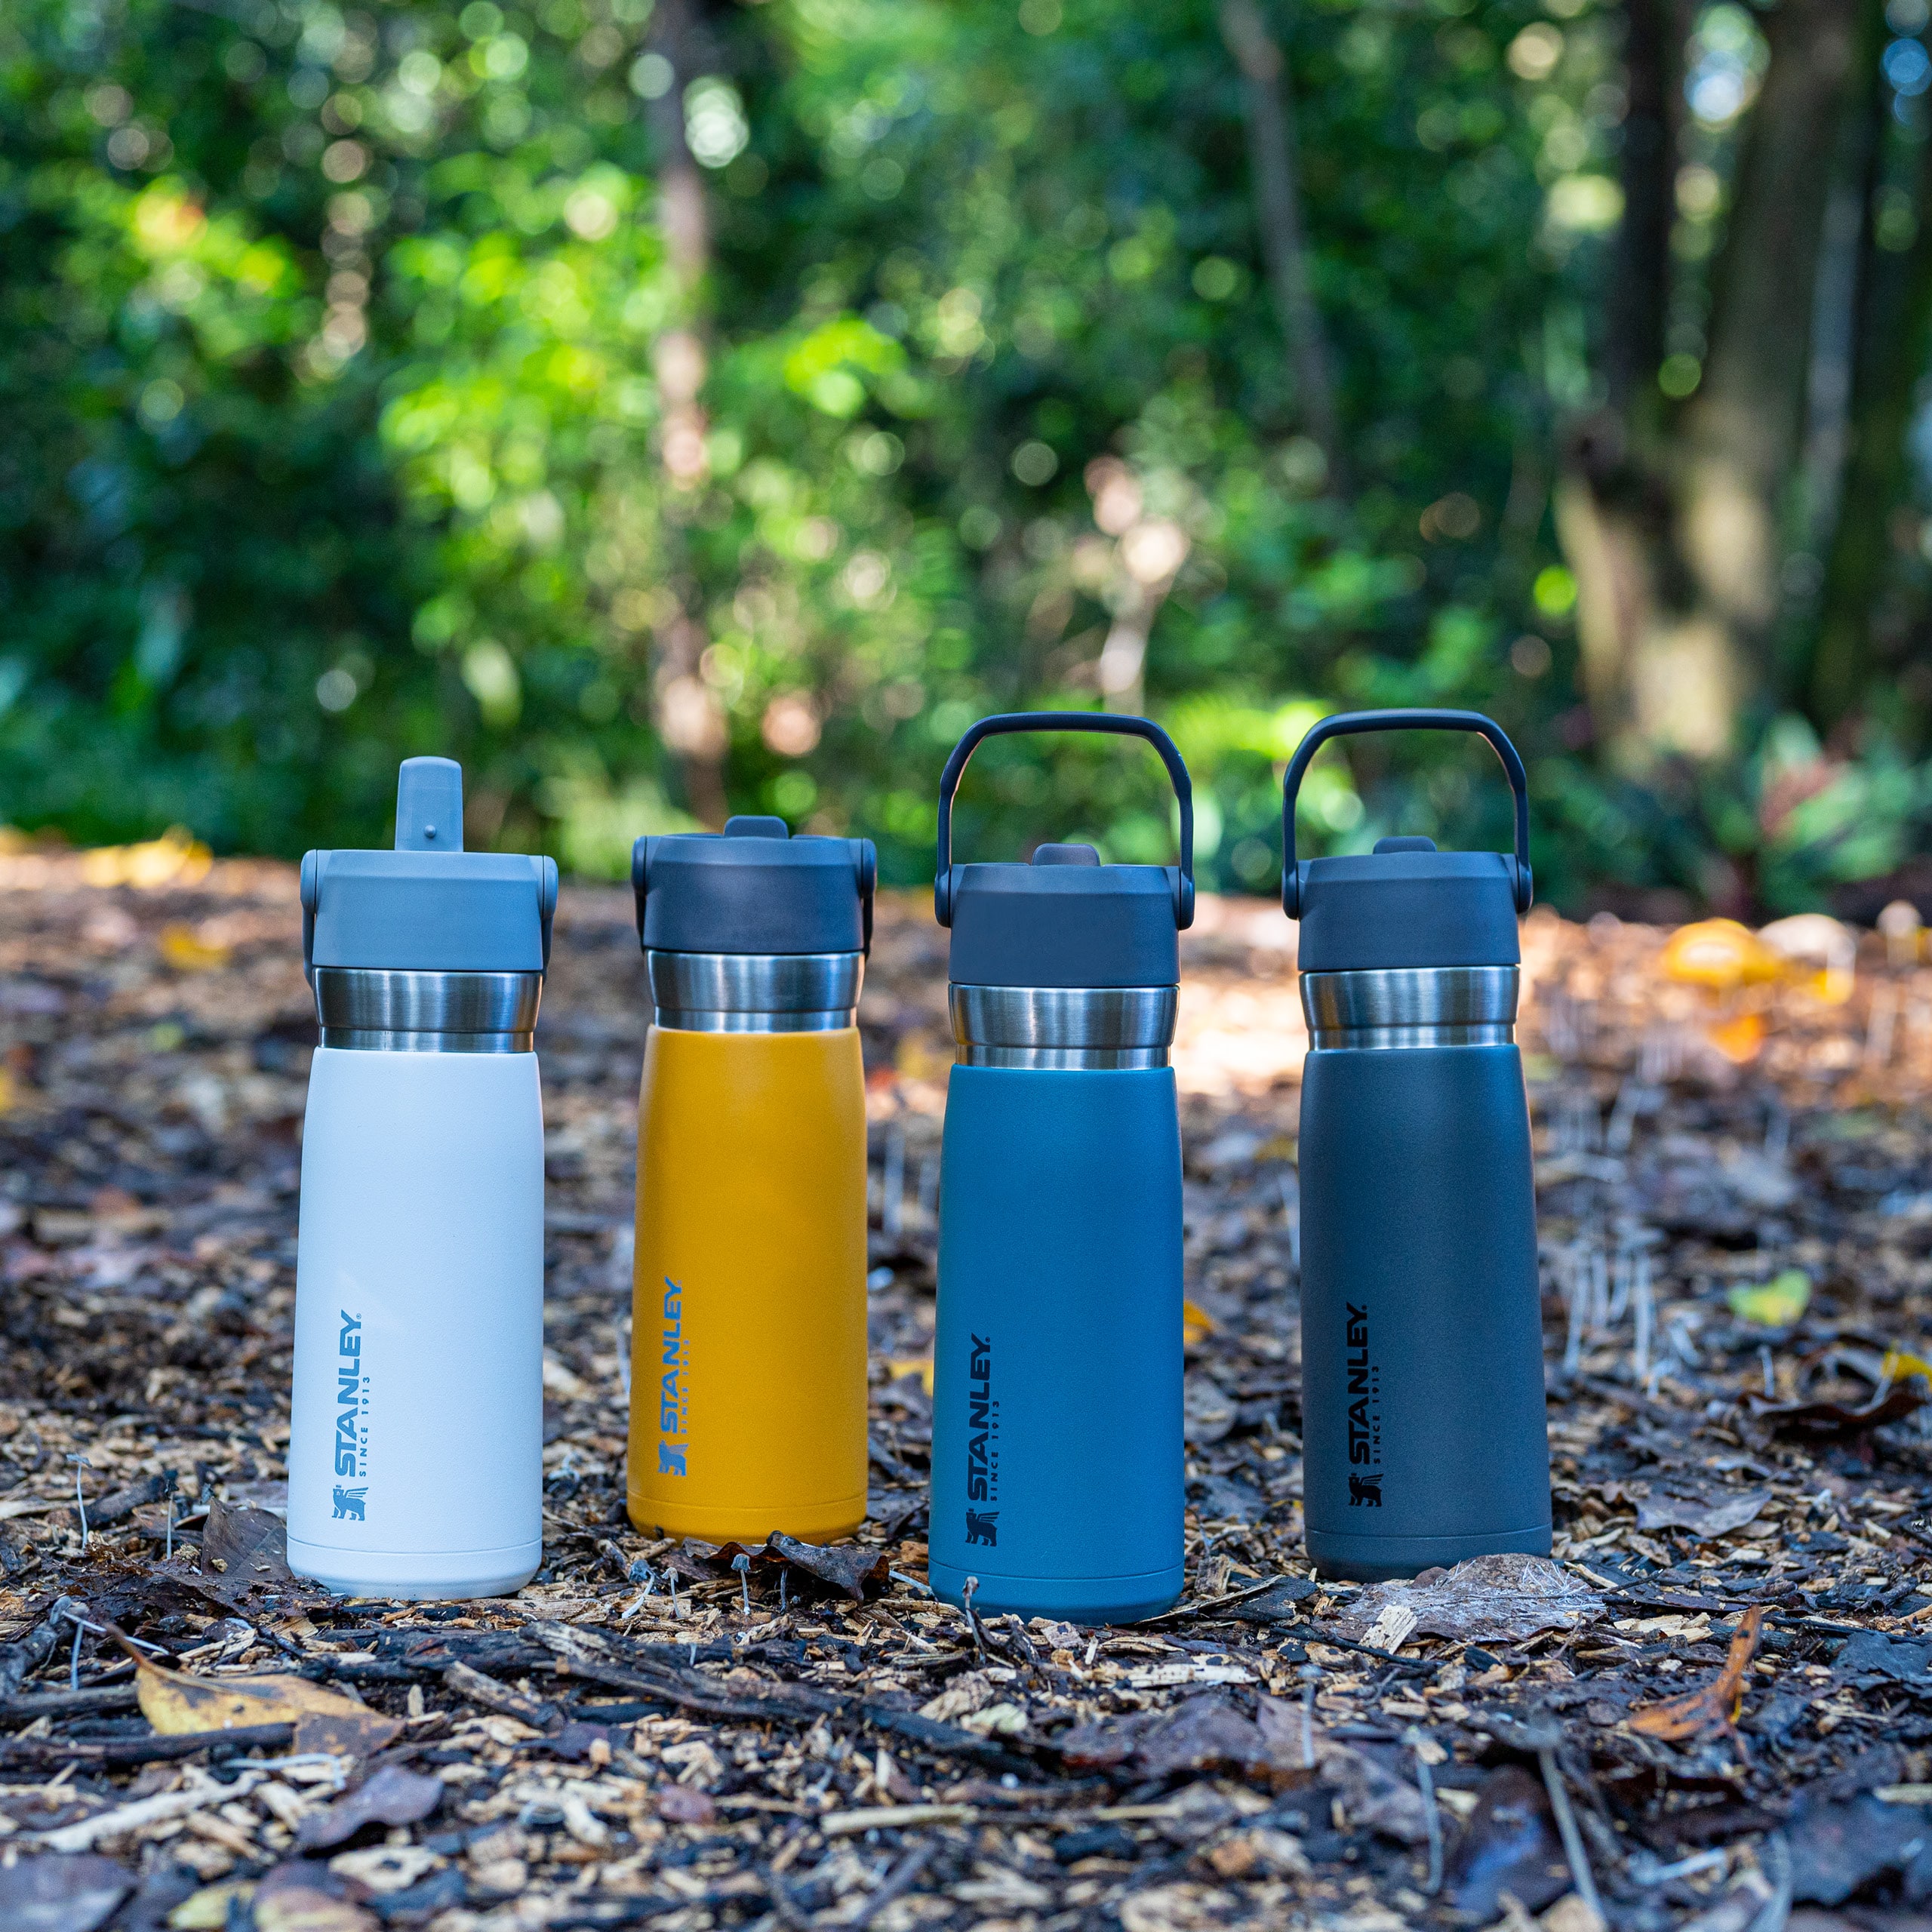 https://www.westendoutdoors.co.uk/wp-content/uploads/2022/12/Stanley-The-GO-IceFlow%E2%84%A2-Flip-Straw-Water-Bottle-0.65L-_-22-OZ-Lifestyle-Images-3.jpg